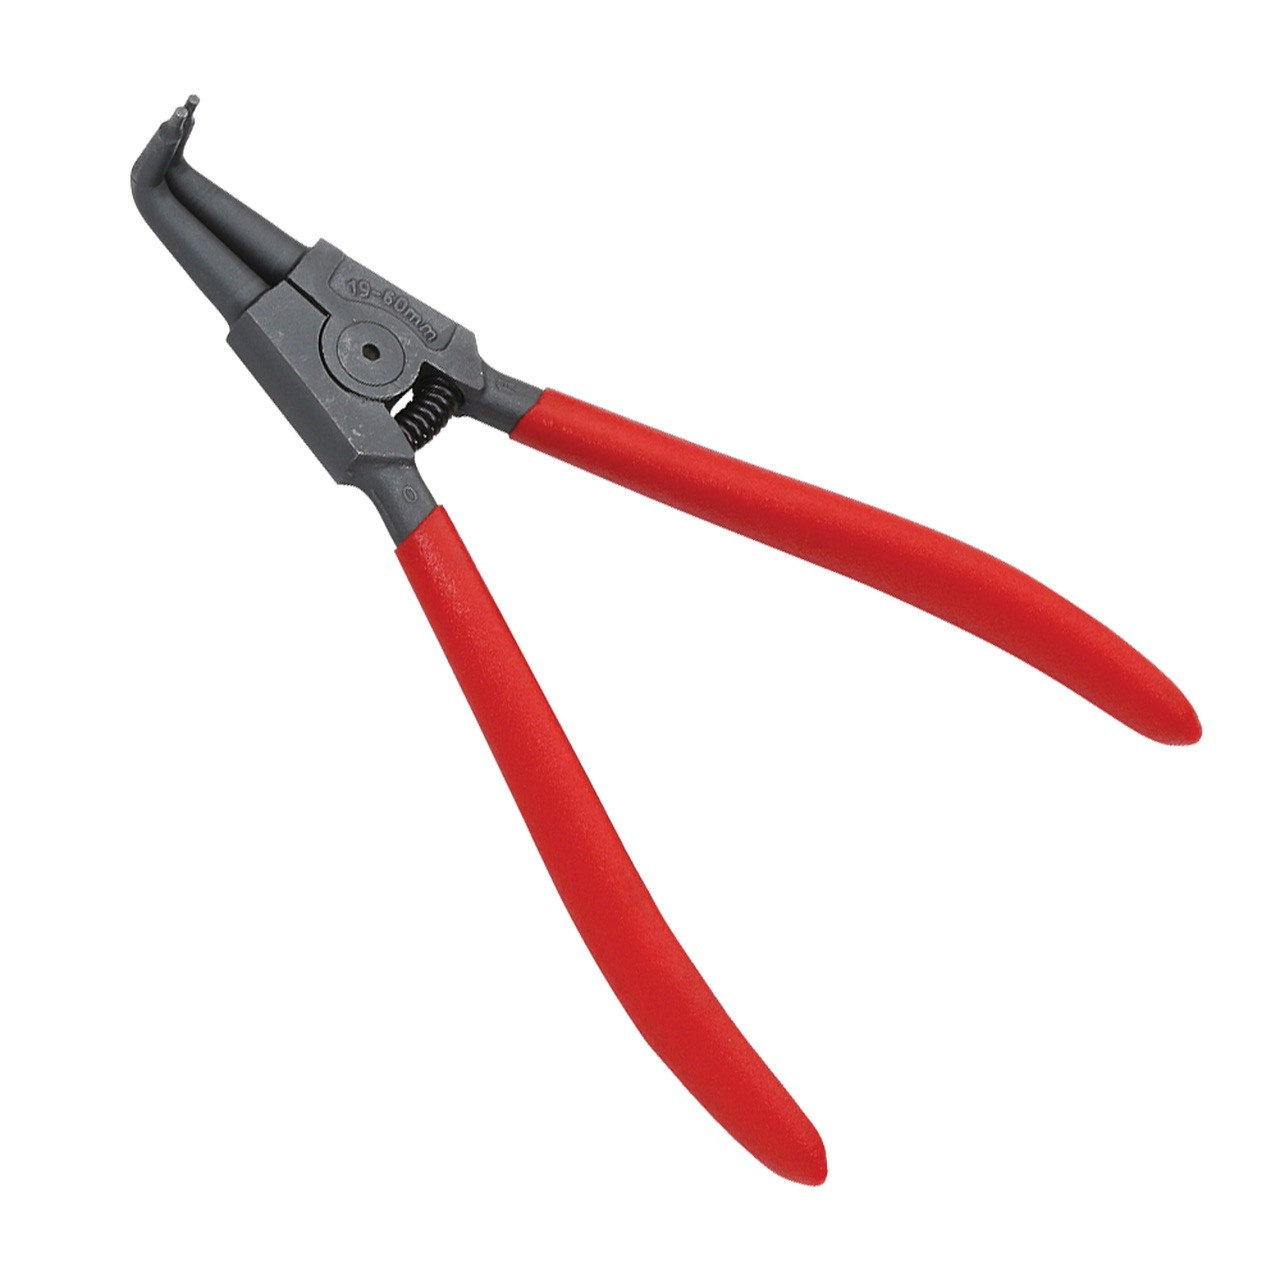 7-inch Professional Snap Ring Pliers Set - J3 Competition